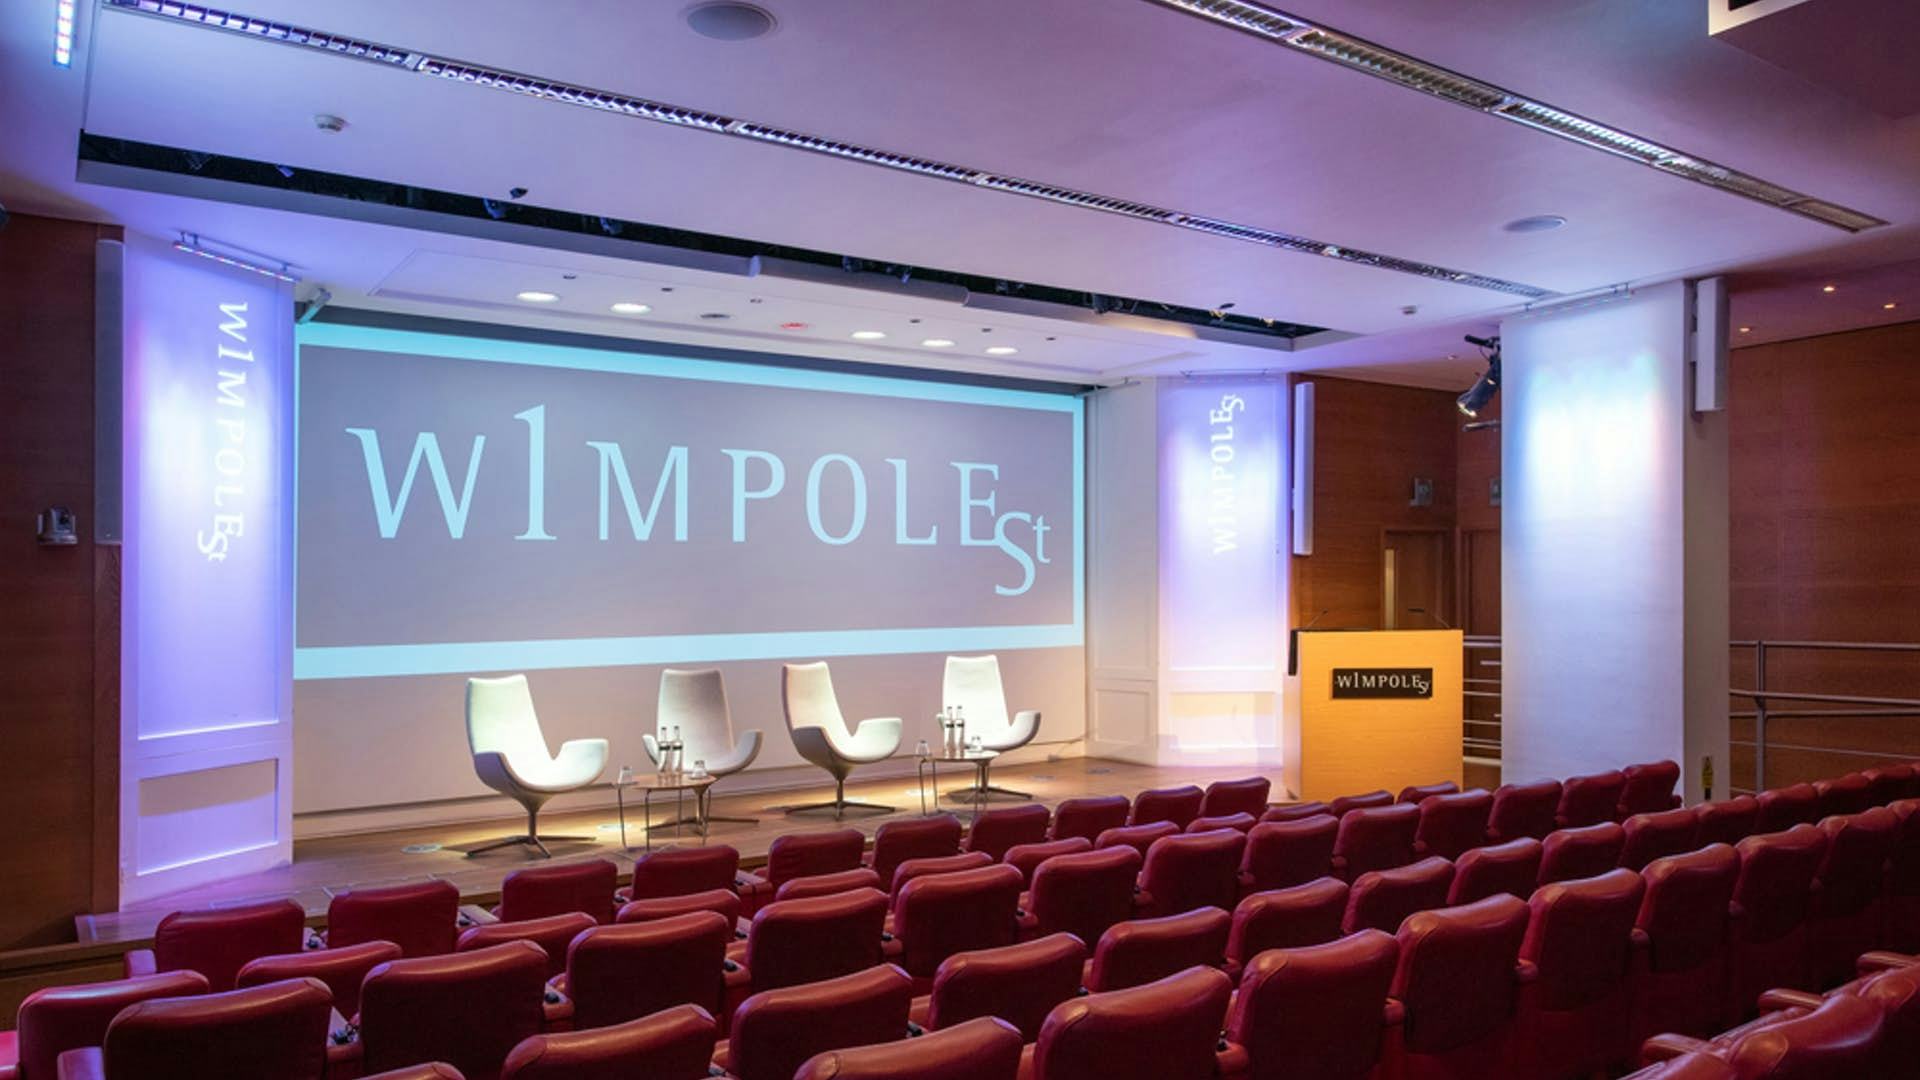 Auditorium view at 1 Wimpole Street